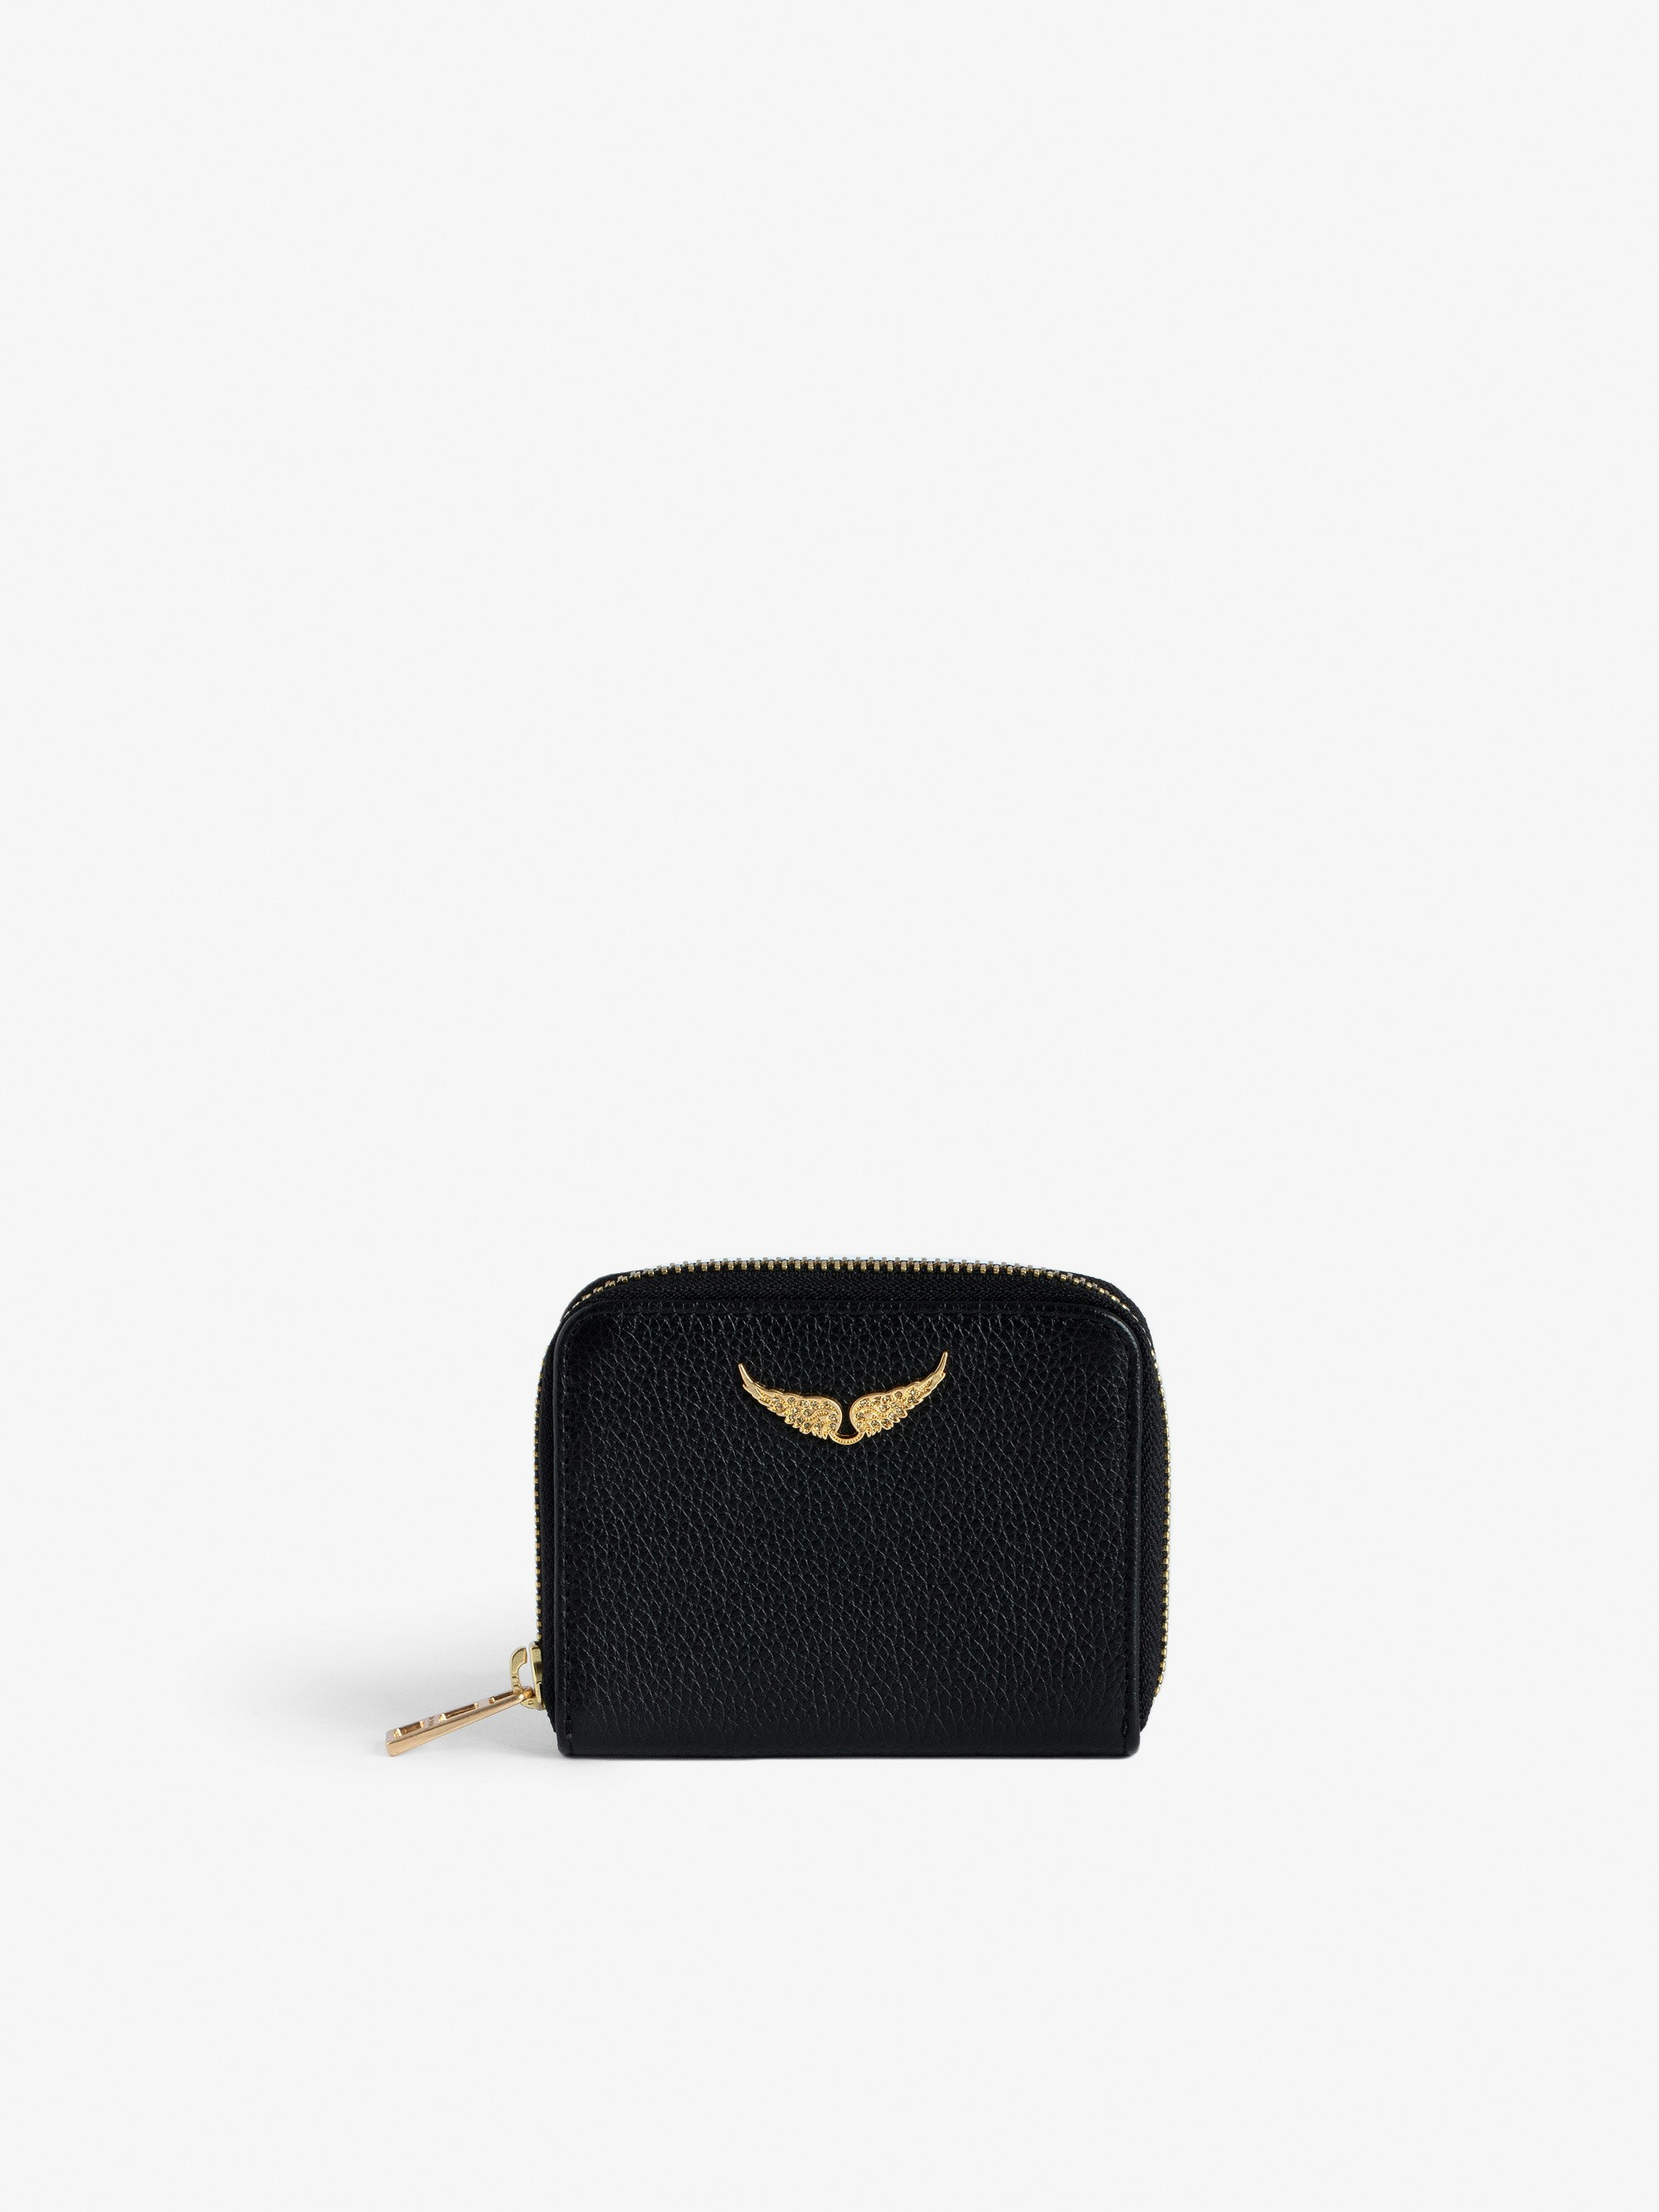 Mini ZV Coin Purse - Women’s black grained leather wallet with gold-tone diamanté wings charm.